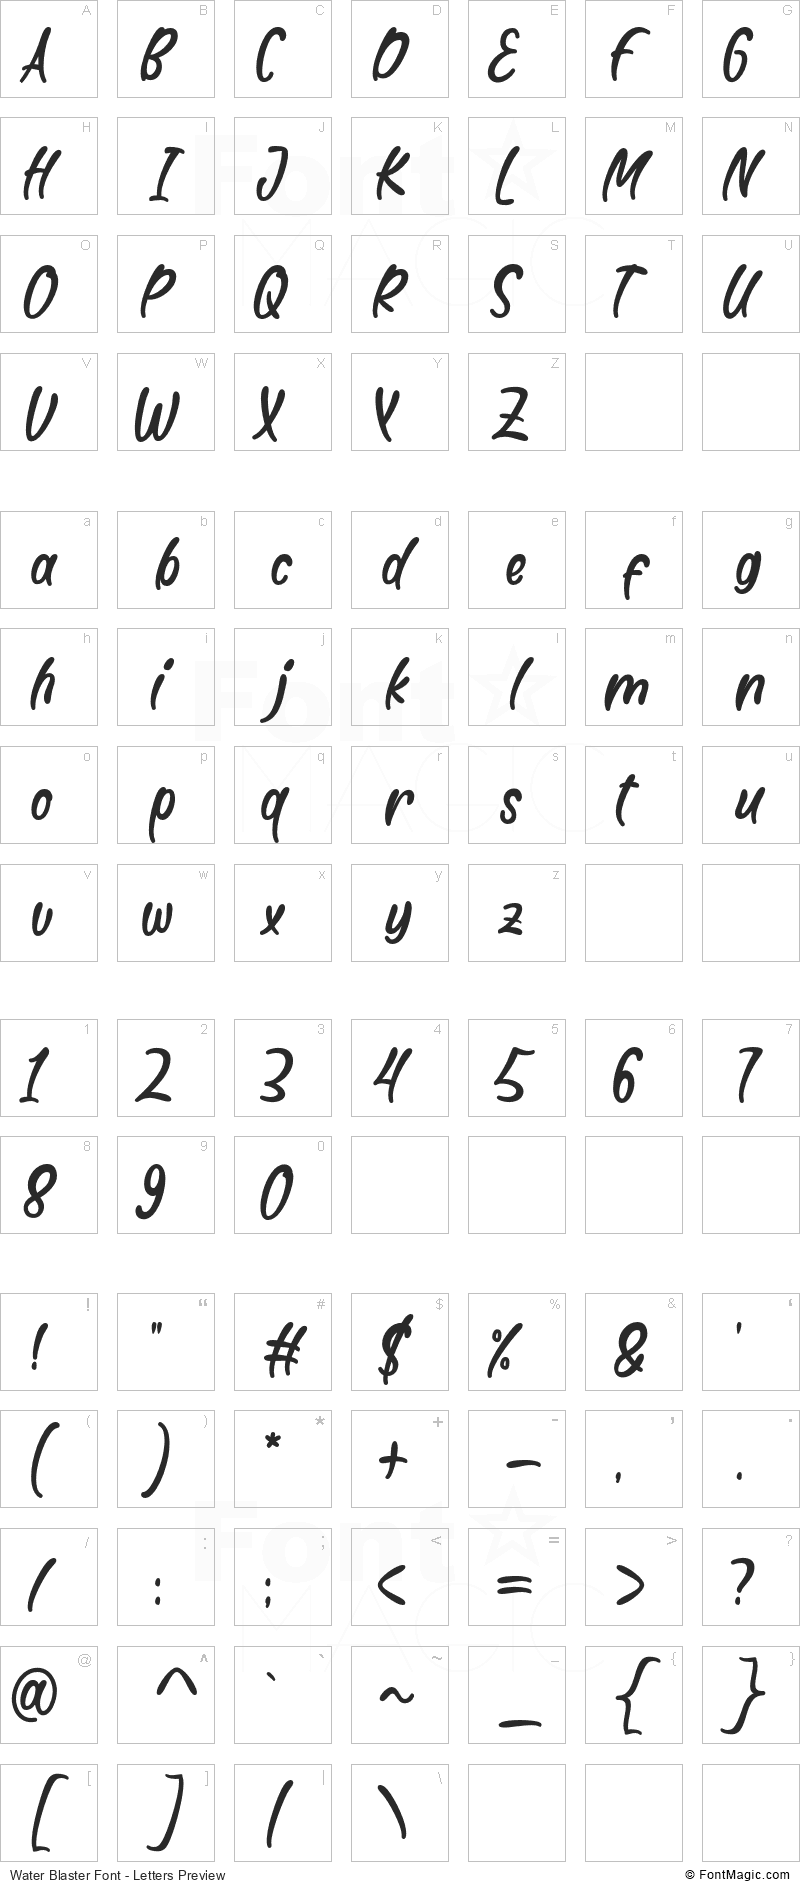 Water Blaster Font - All Latters Preview Chart